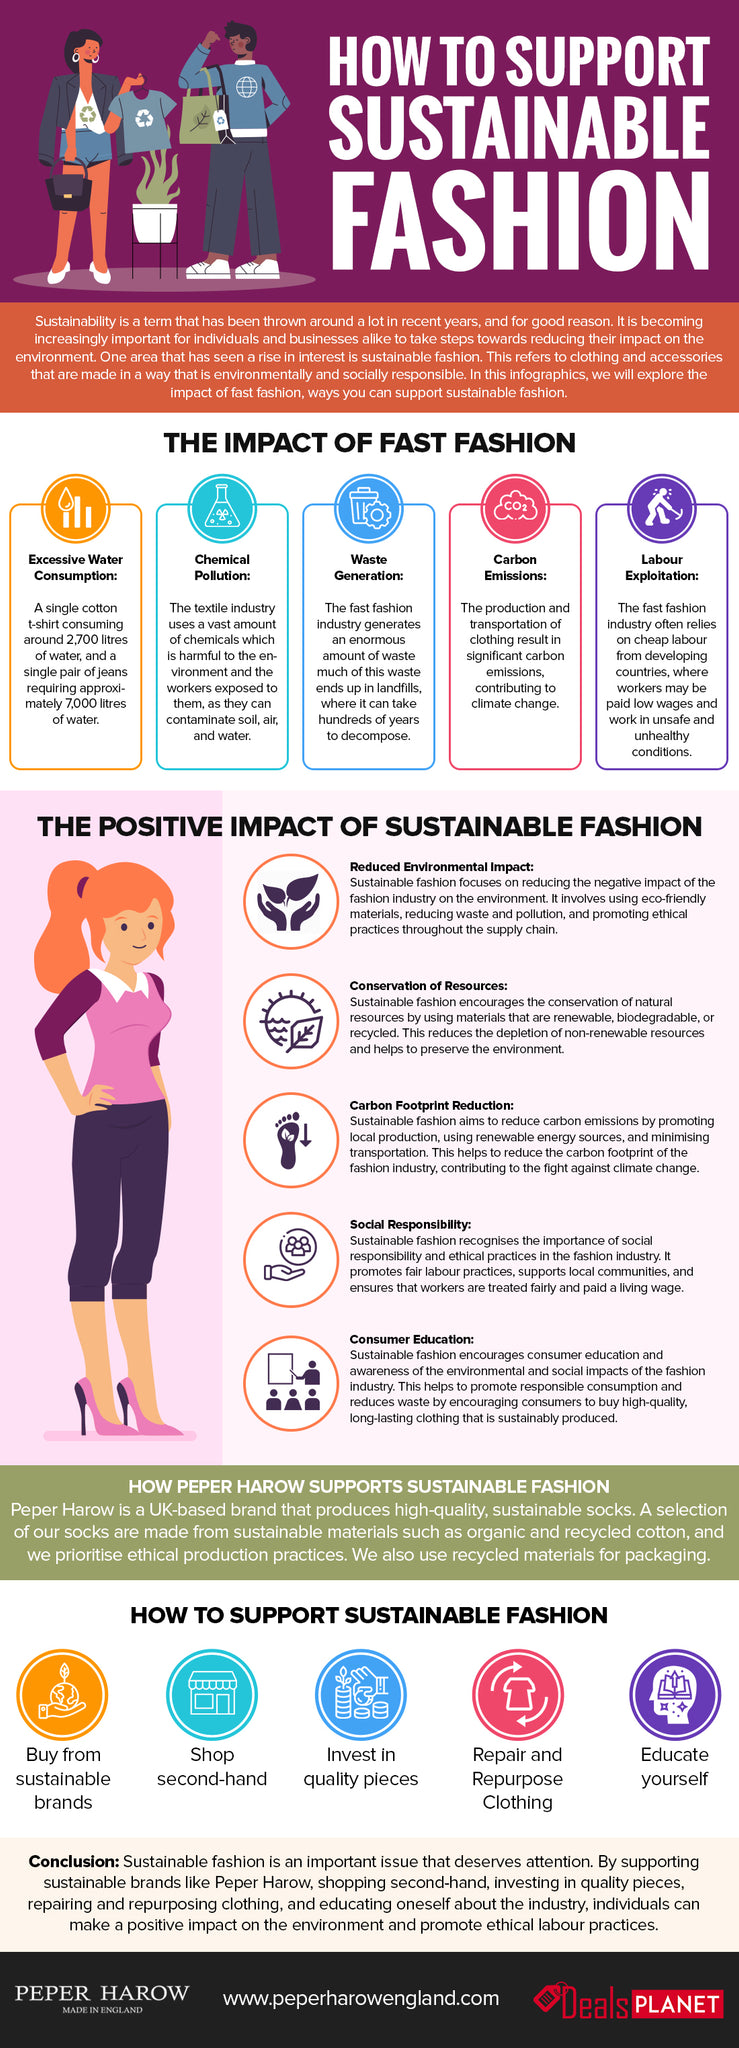 How to support sustainable fashion infographic